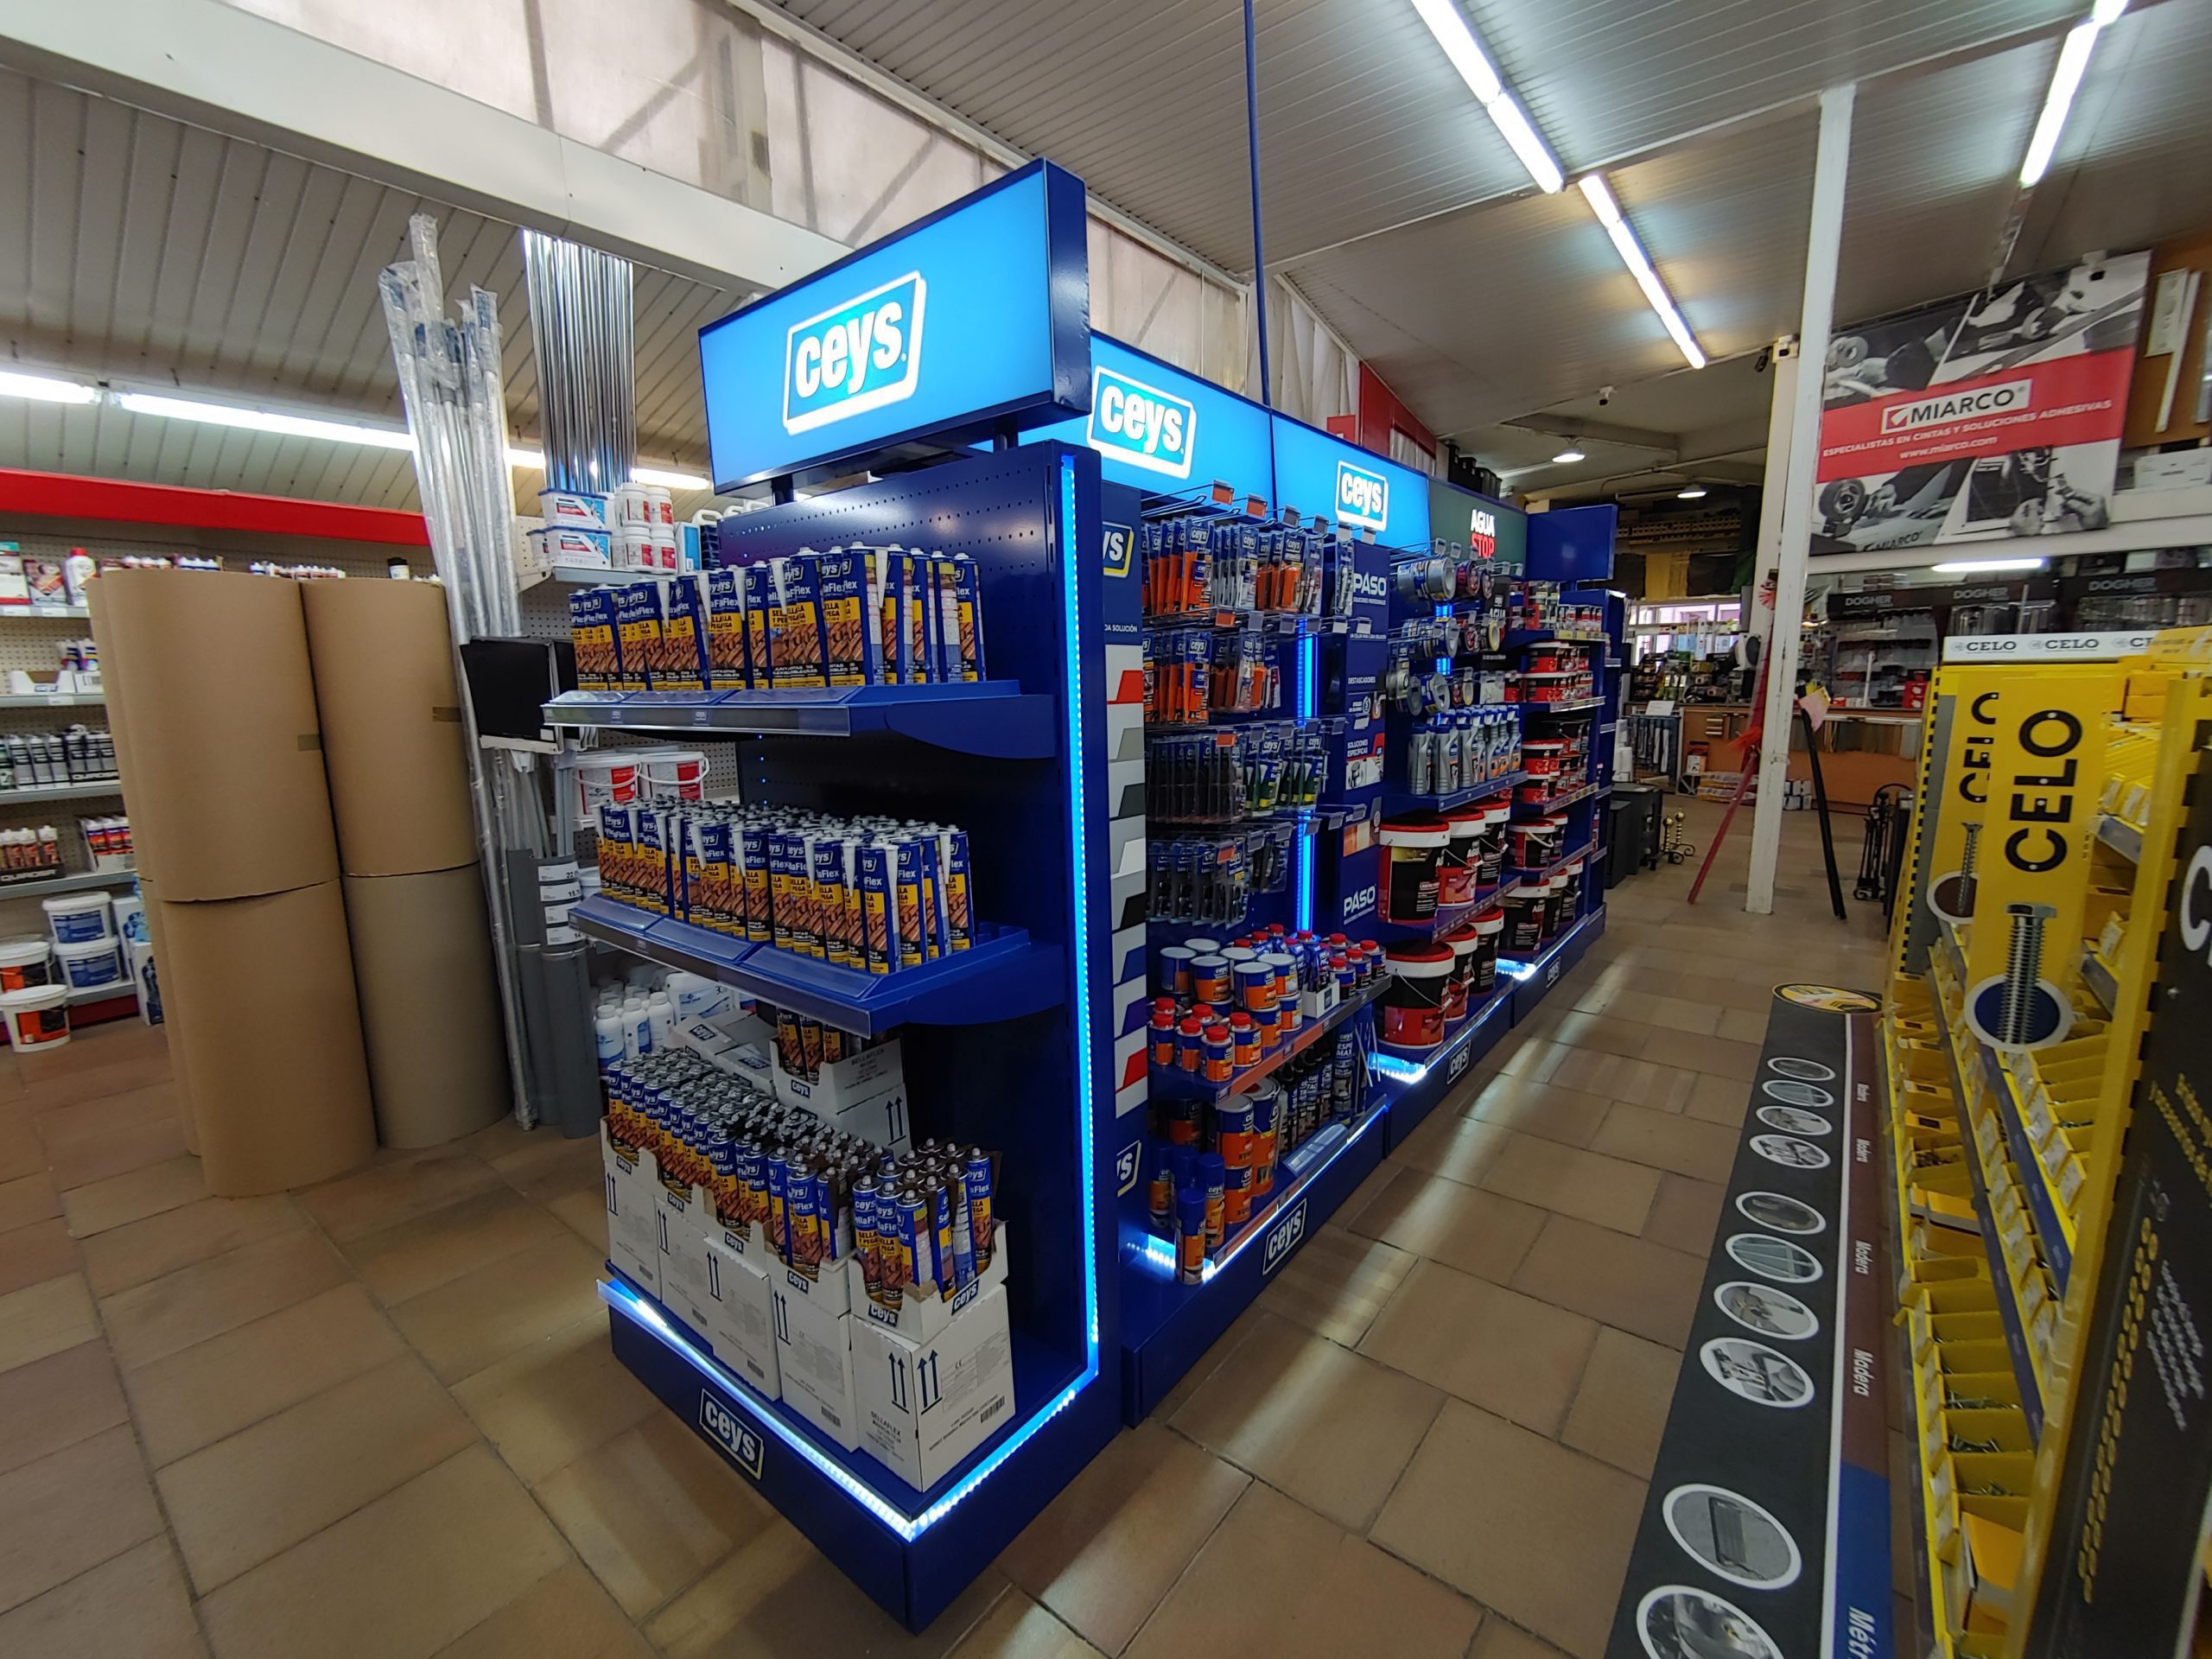 Ceys point-of-sale display. Retail and trade marketing